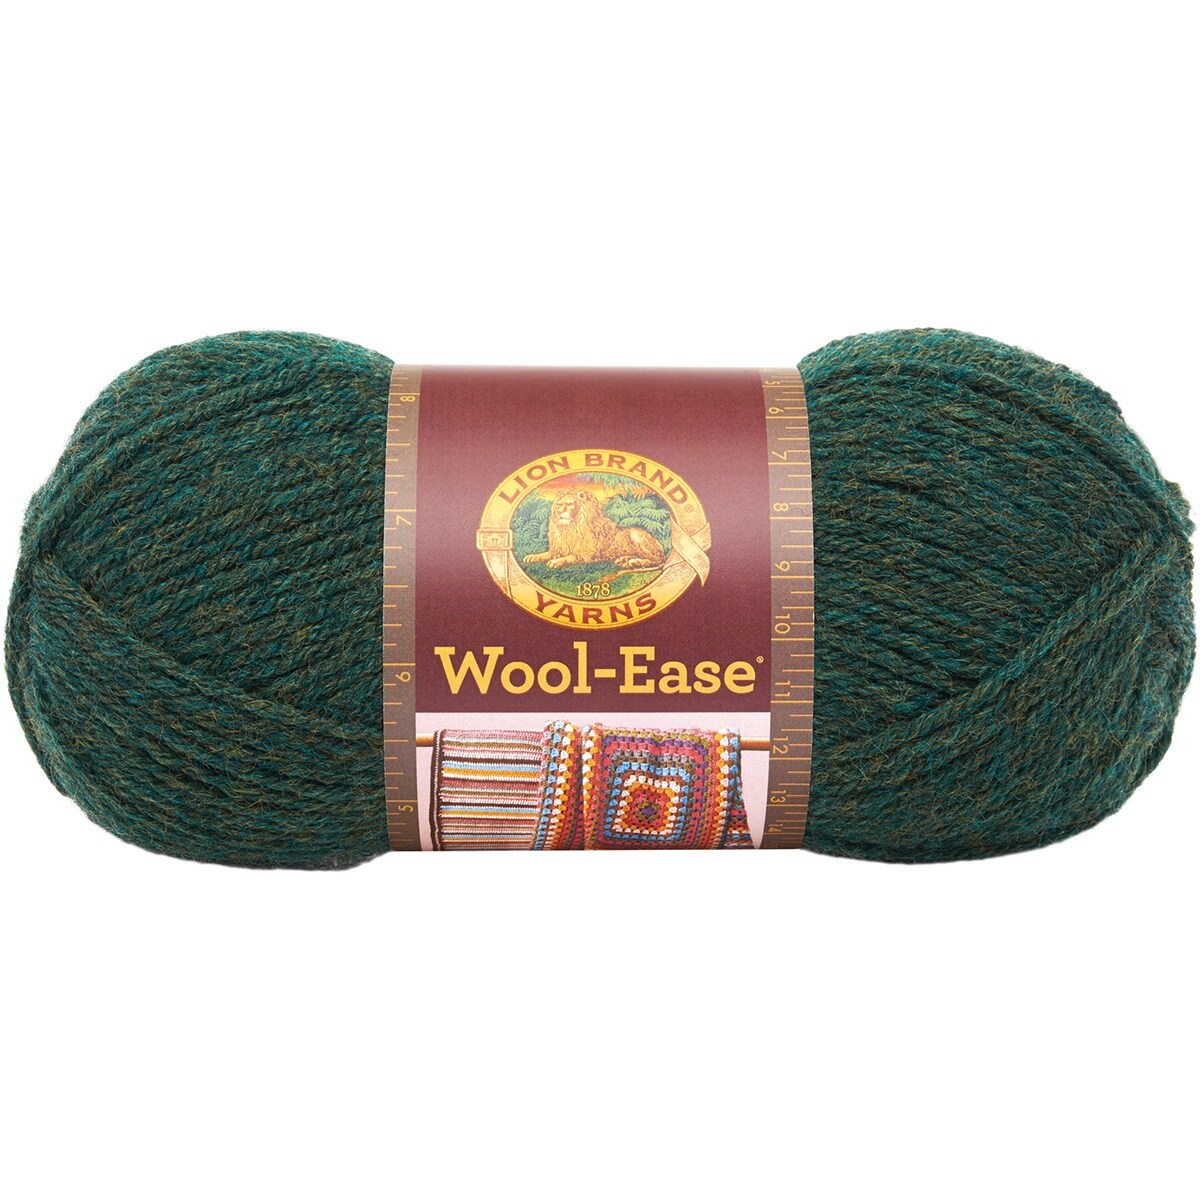 Multipack of 20 - Lion Brand Wool-Ease Yarn -Forest Green Heather